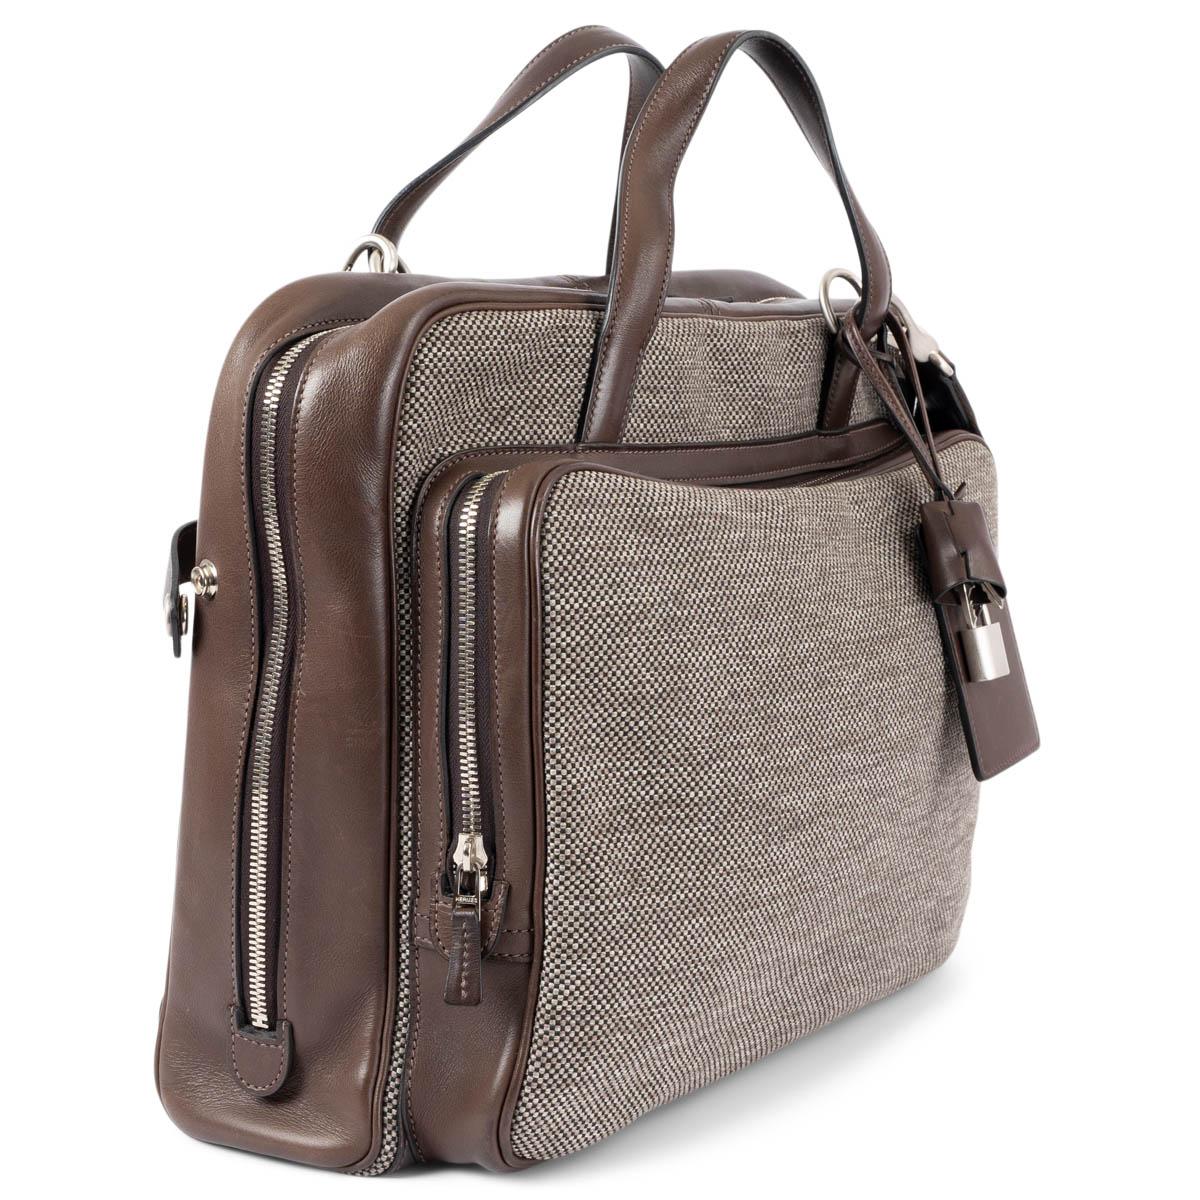 100% authentic Hermès Calèche-Express Messenger carry-on bag in taupe and black H Tech canvas with Ebene (dark brown) Veau Barenia leather trims. Features an exterior zip pocket on the front and an open pocket on the back, removable and adjustable